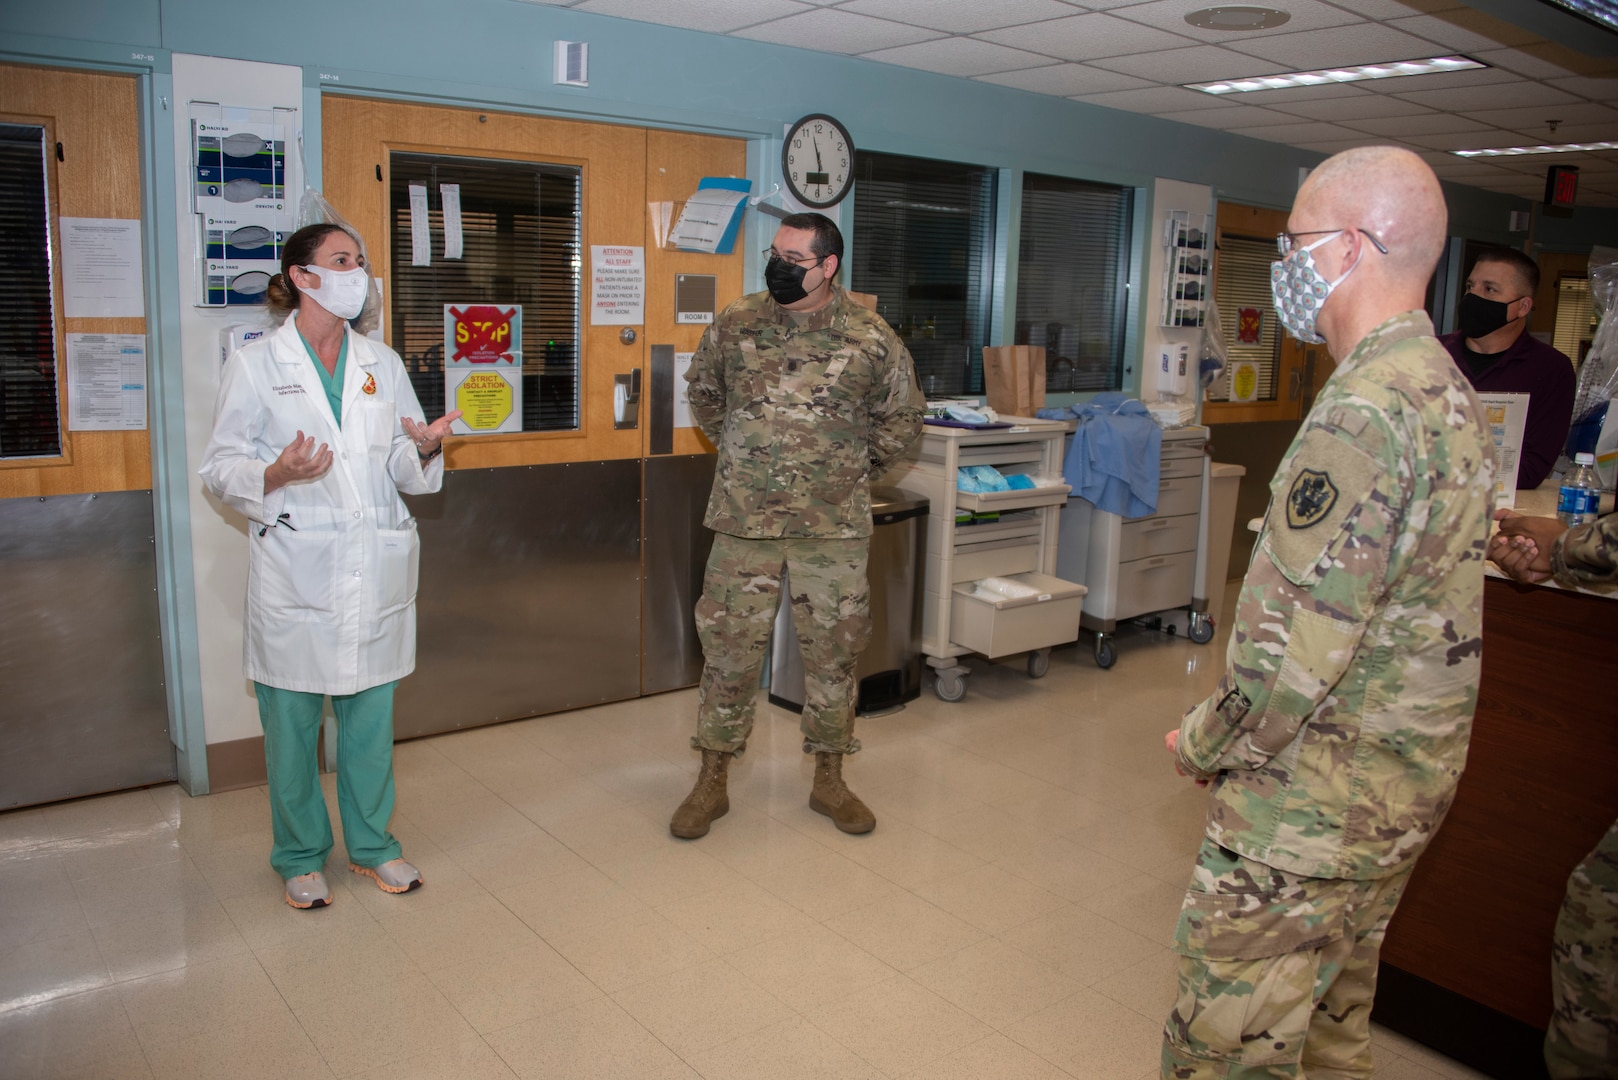 Army Lt. Gen. Ronald Place, Director, Defense Health Agency, talks with Army Lt. Col. Elizabeth Markelz, Chief of Infectious Disease, and Army Lt. Col. Robert Walter, Chief of Pulmonary and Critical Care Medicine, at Brooke Army Medical Center, Fort Sam Houston, Texas, Jan. 20, 2021. Place said there is no location in DoD that has seen more COVID-positive cases or COVID-positive workload than the medical facilities at JBSA, lauding the relationship between the military health system here and their involvement in the community.